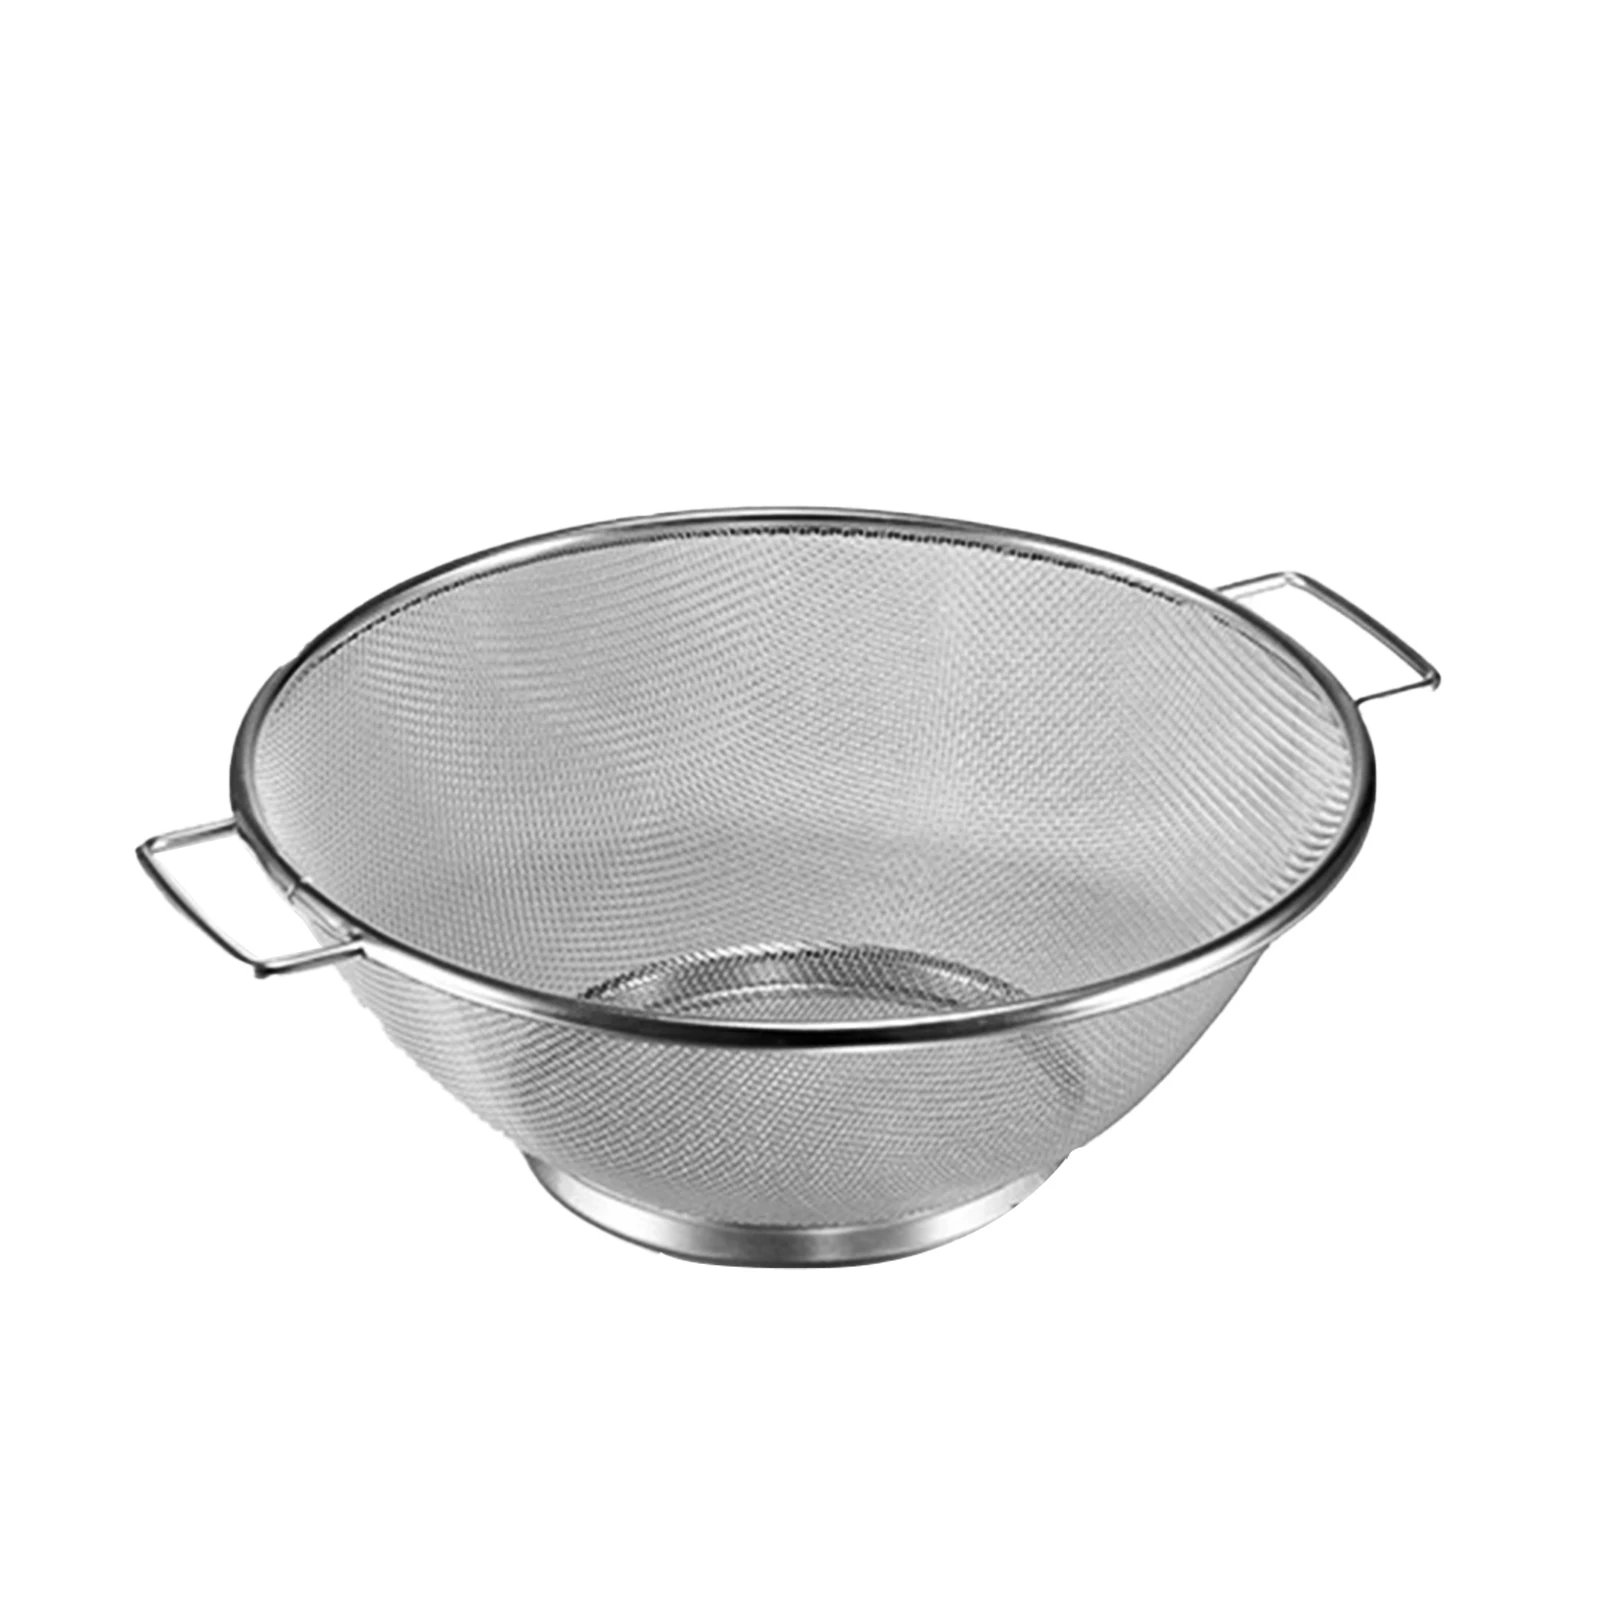 Rustproof Rice Non Slip Vegetables Home Professional Fruits With Handle Kitchen Strainer Fine Mesh Stainless Steel Colander